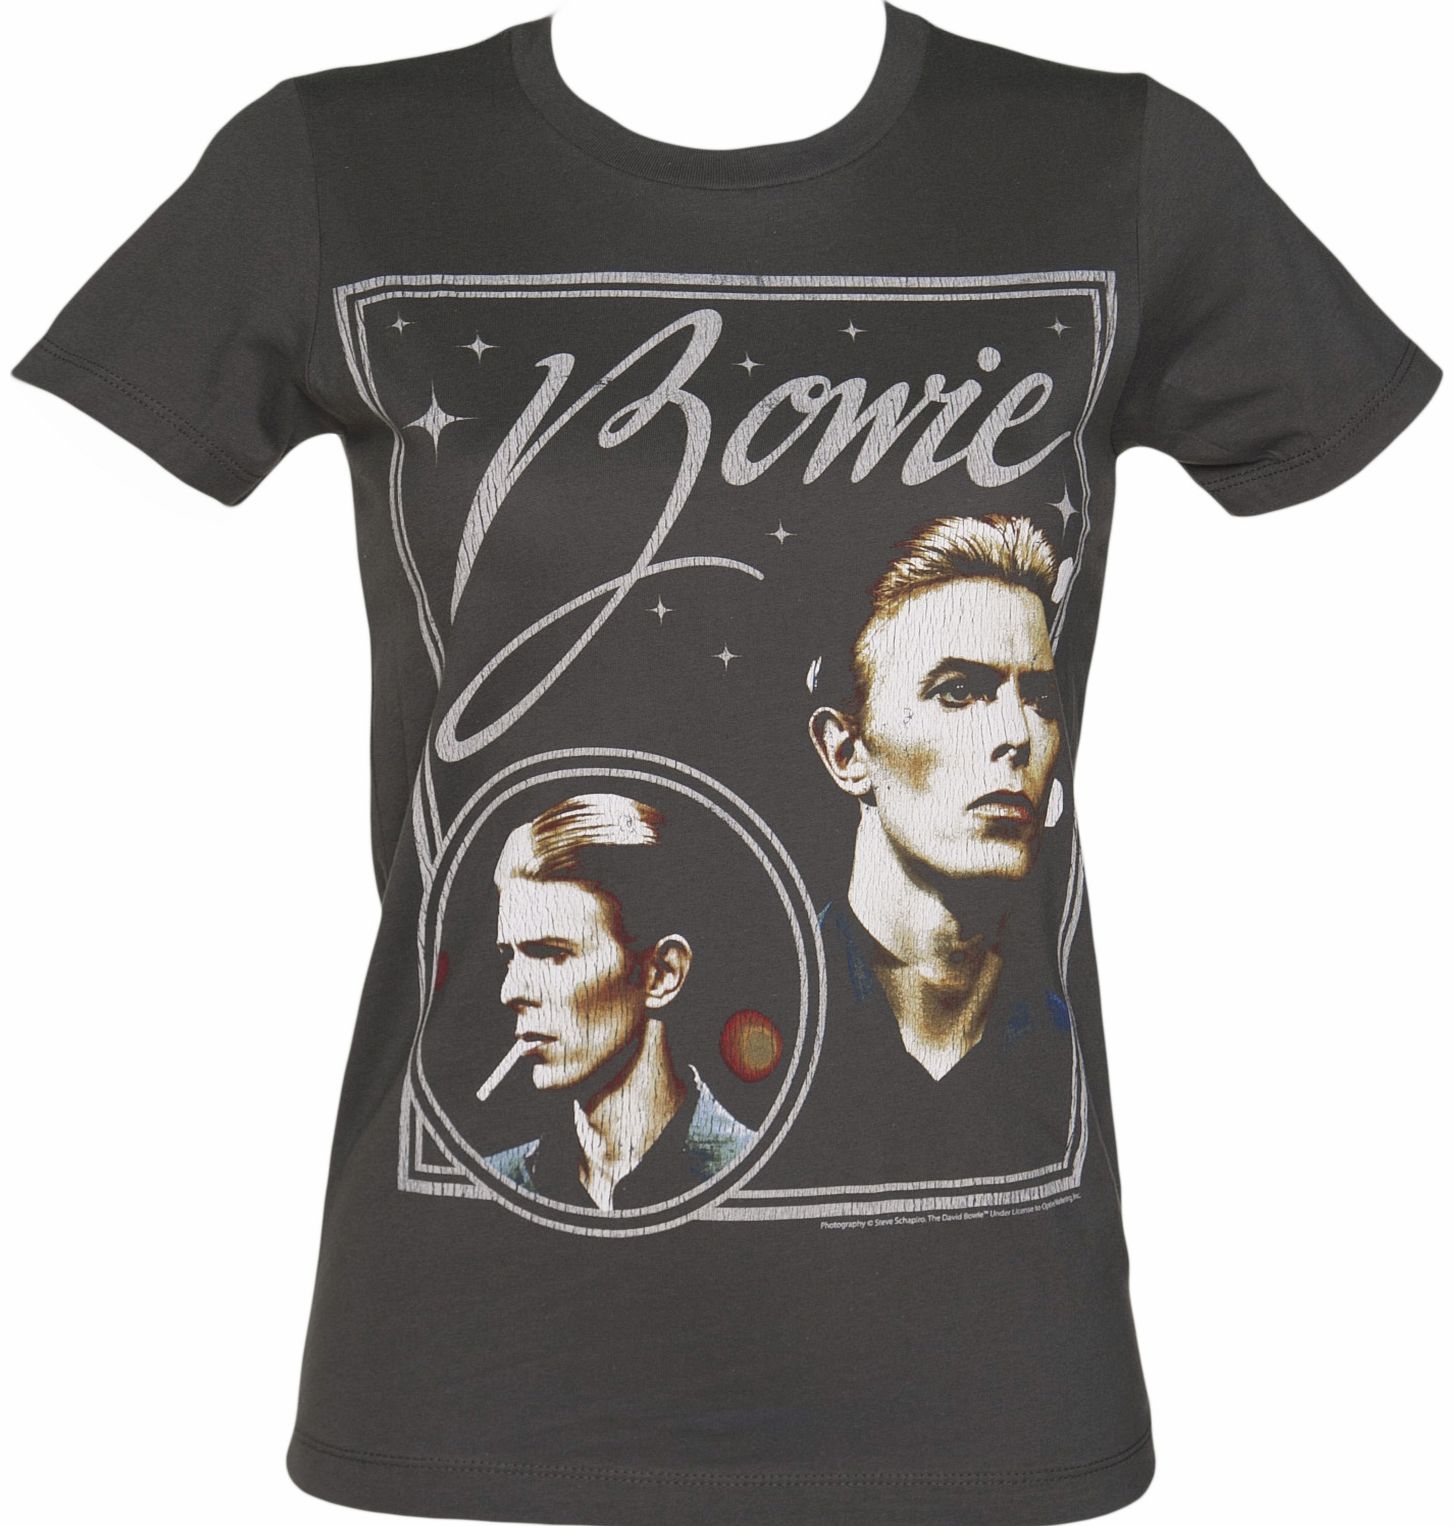 Ladies David Bowie Vision T-Shirt from Goodie